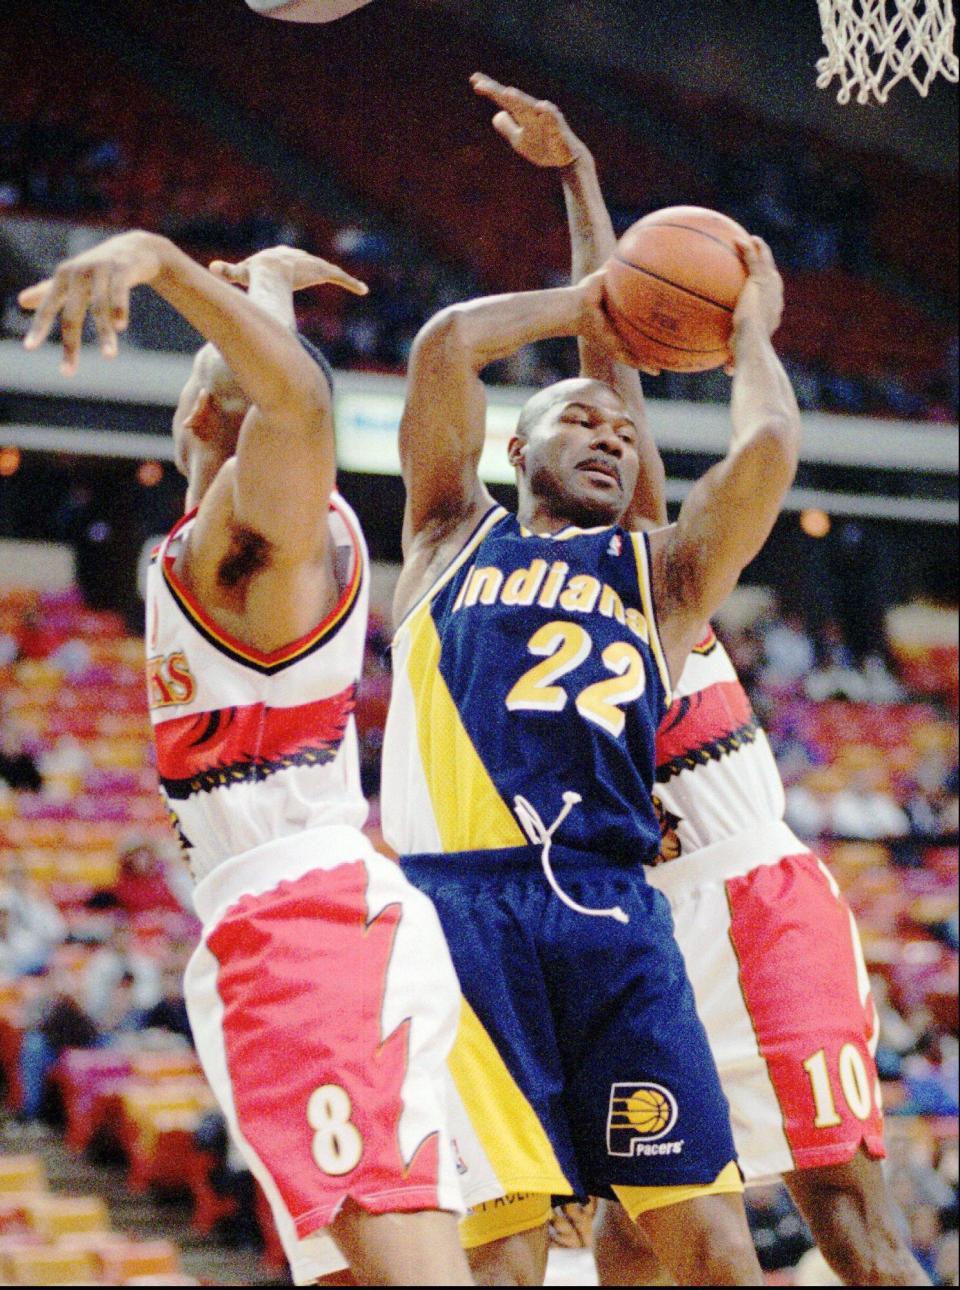 Ricky Pierce (22), one of the NBA's greatest sixth men, had a solid season at the age of 36 for the Indiana Pacers.